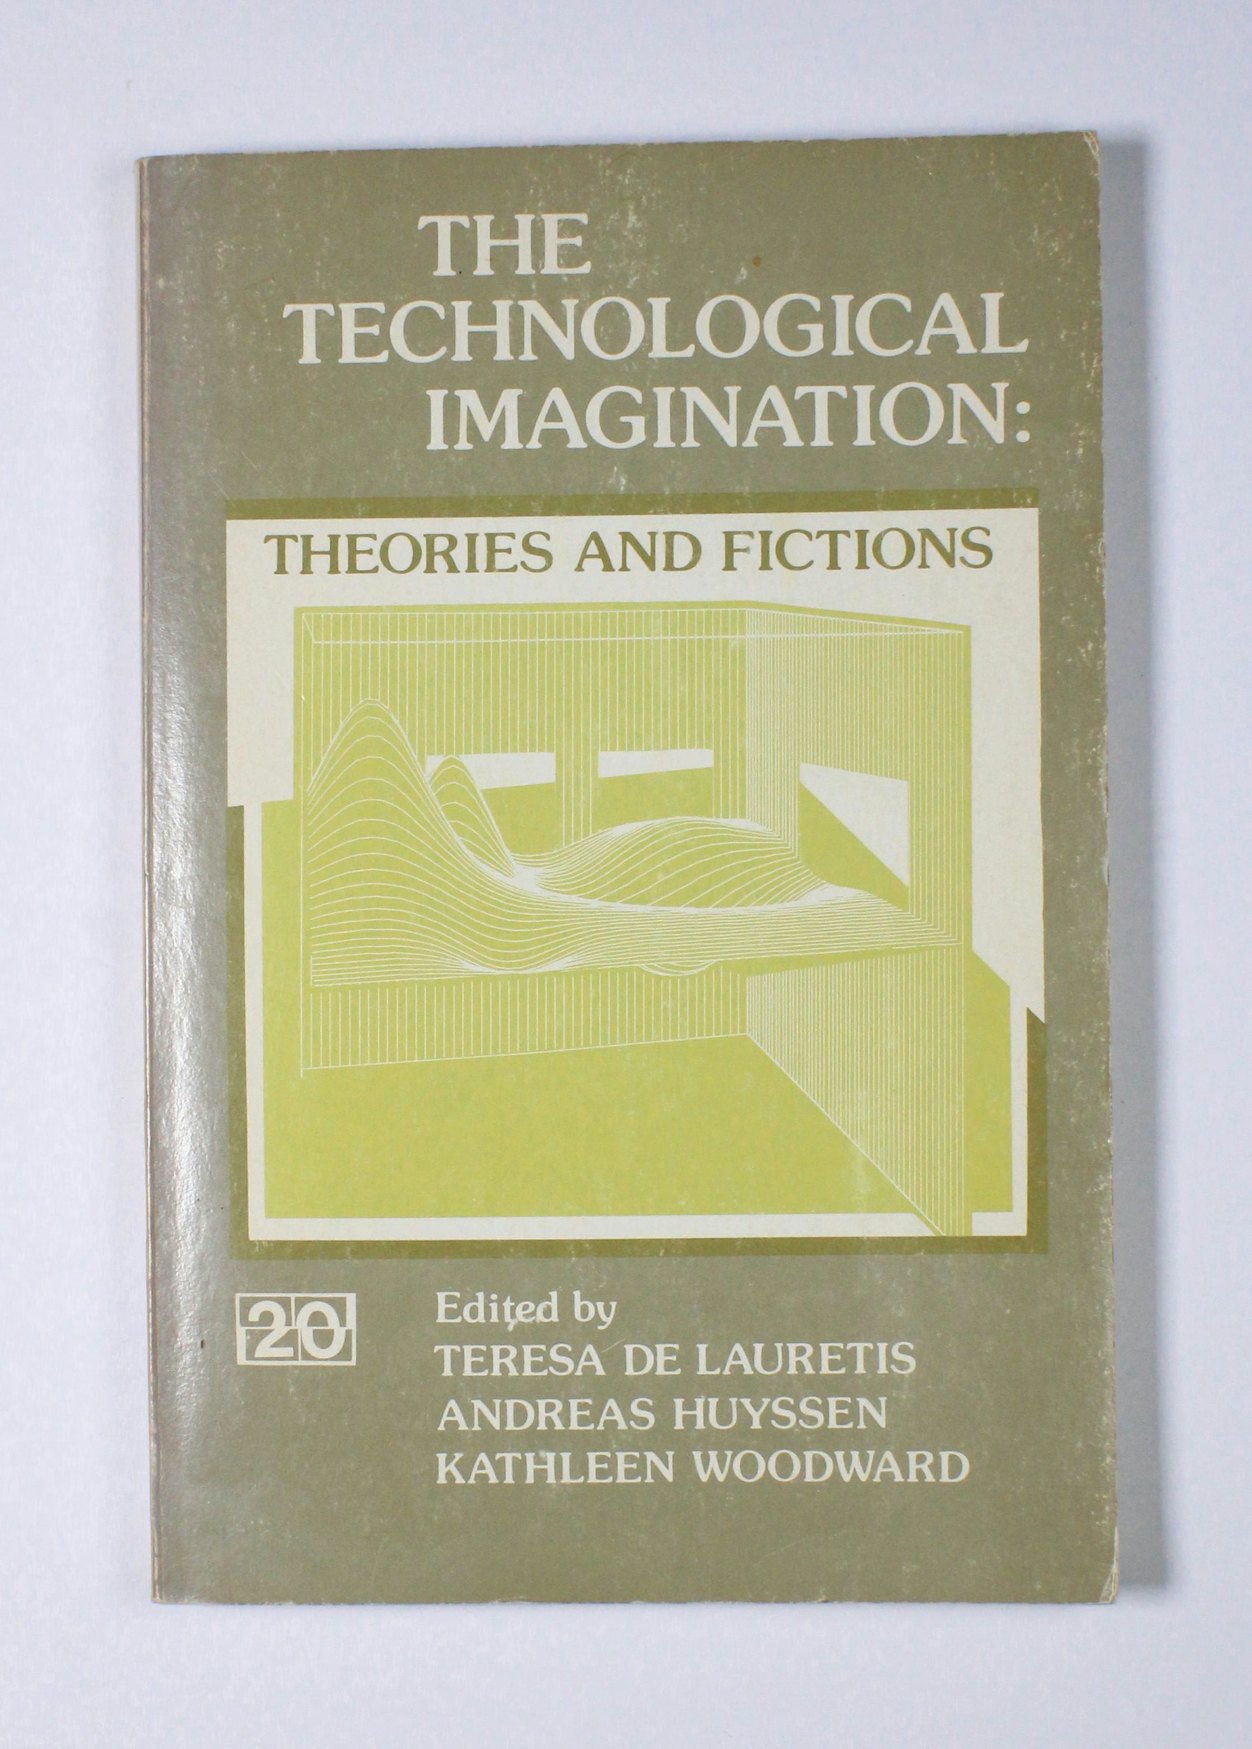 The Technological Imagination: Theories and Fictions